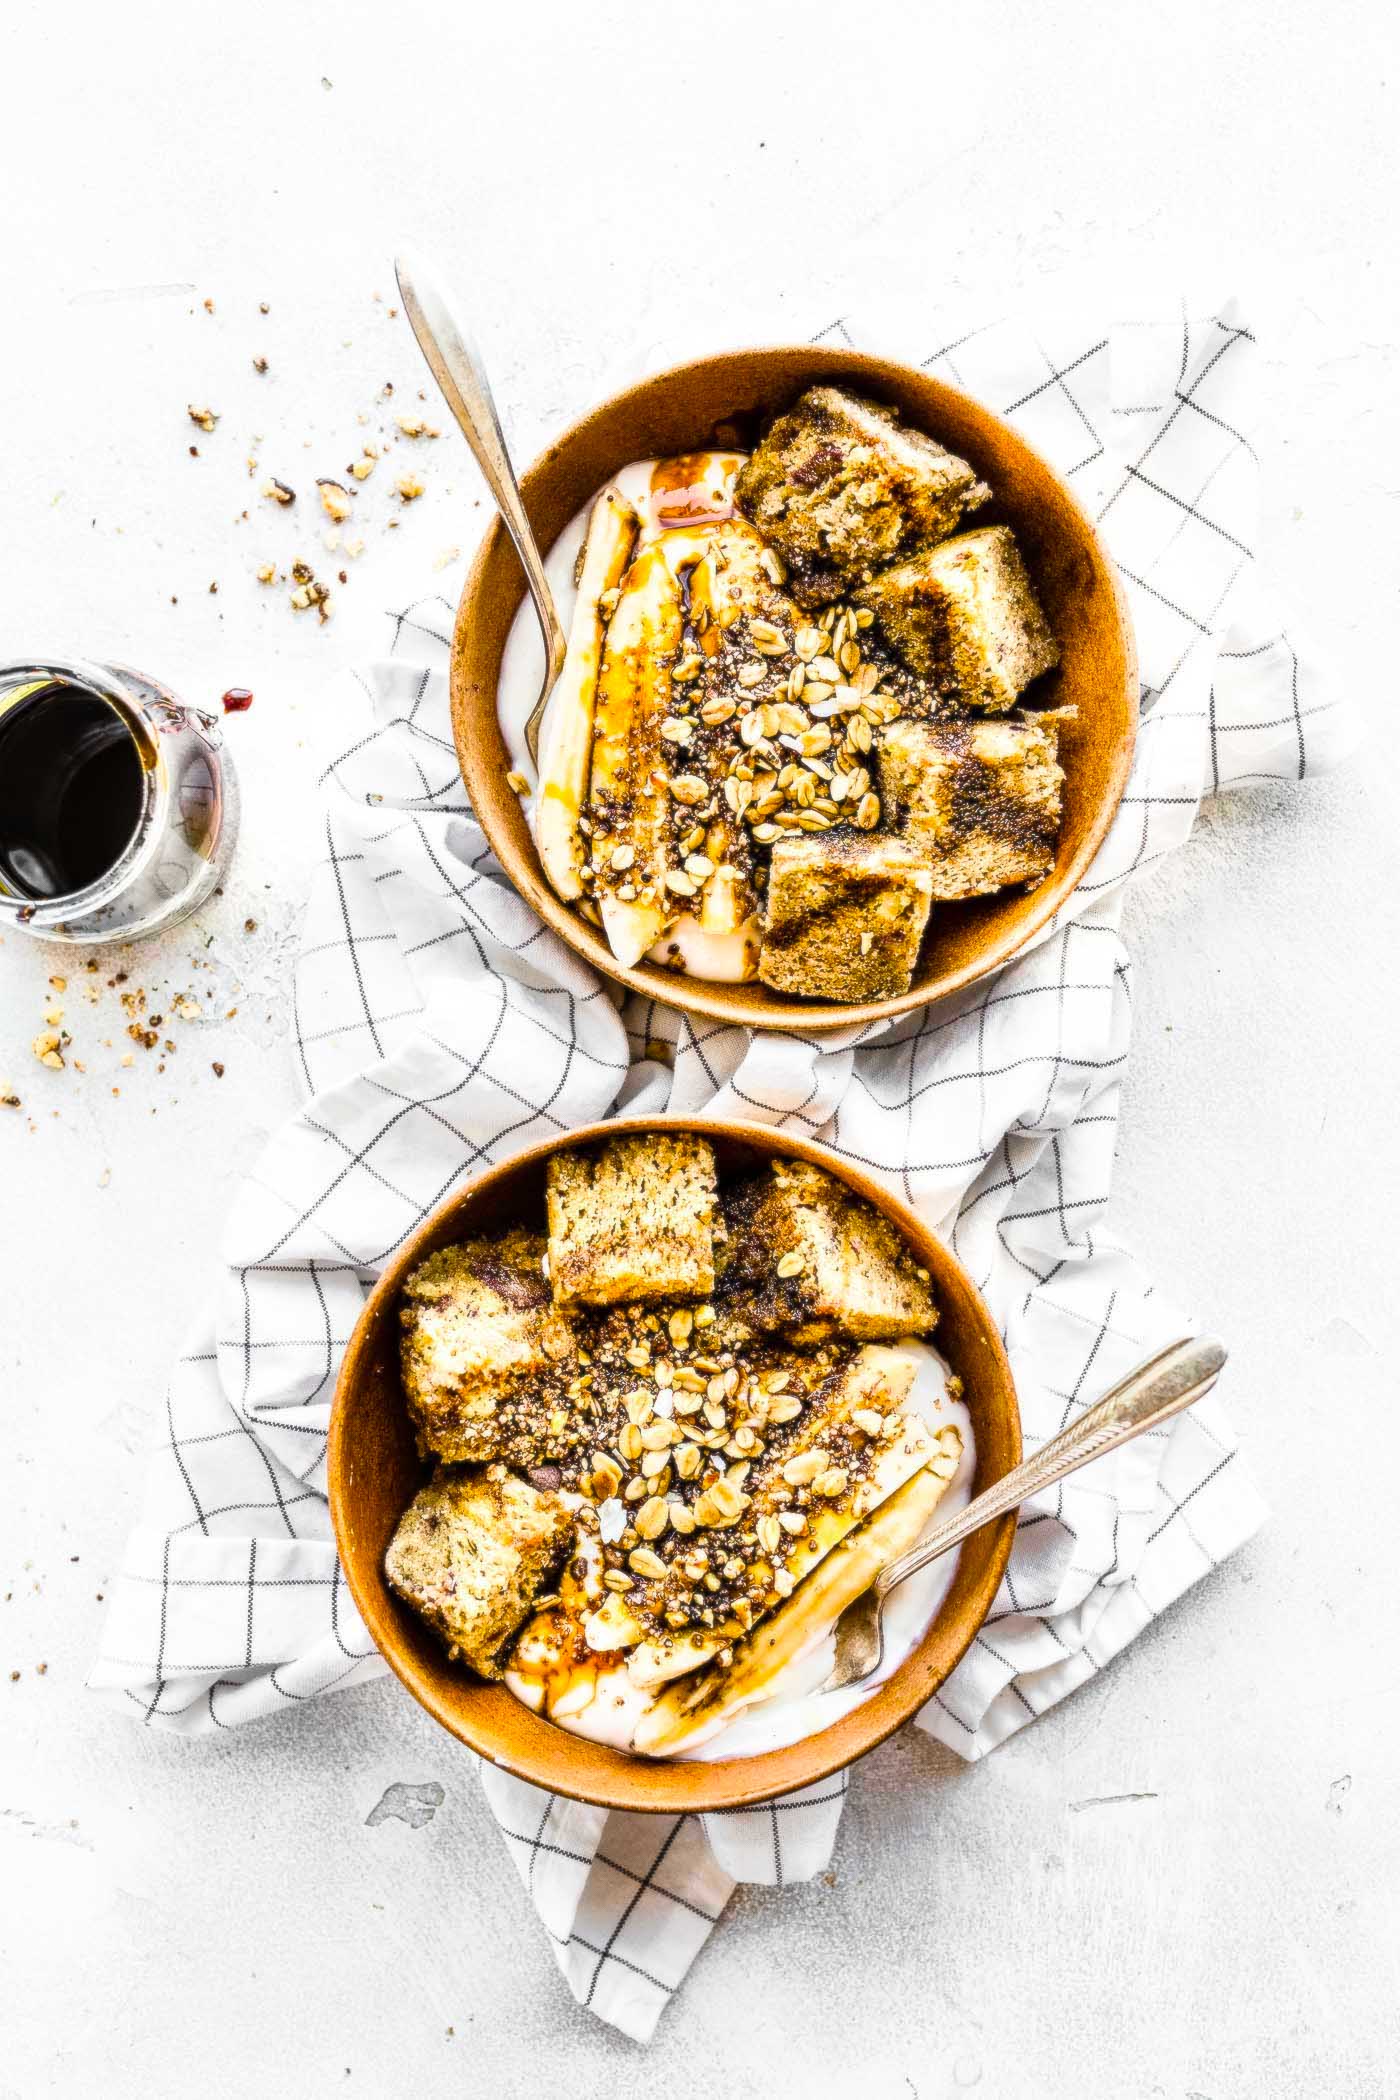 Sticky Date Cake Yogurt Bowls - superfood fruits like dates combined into a grain free cake, then combined into Greek yogurt bowls. Great for a healthy breakfast or dessert. Paleo Option #grainfree #paleo #superfoods